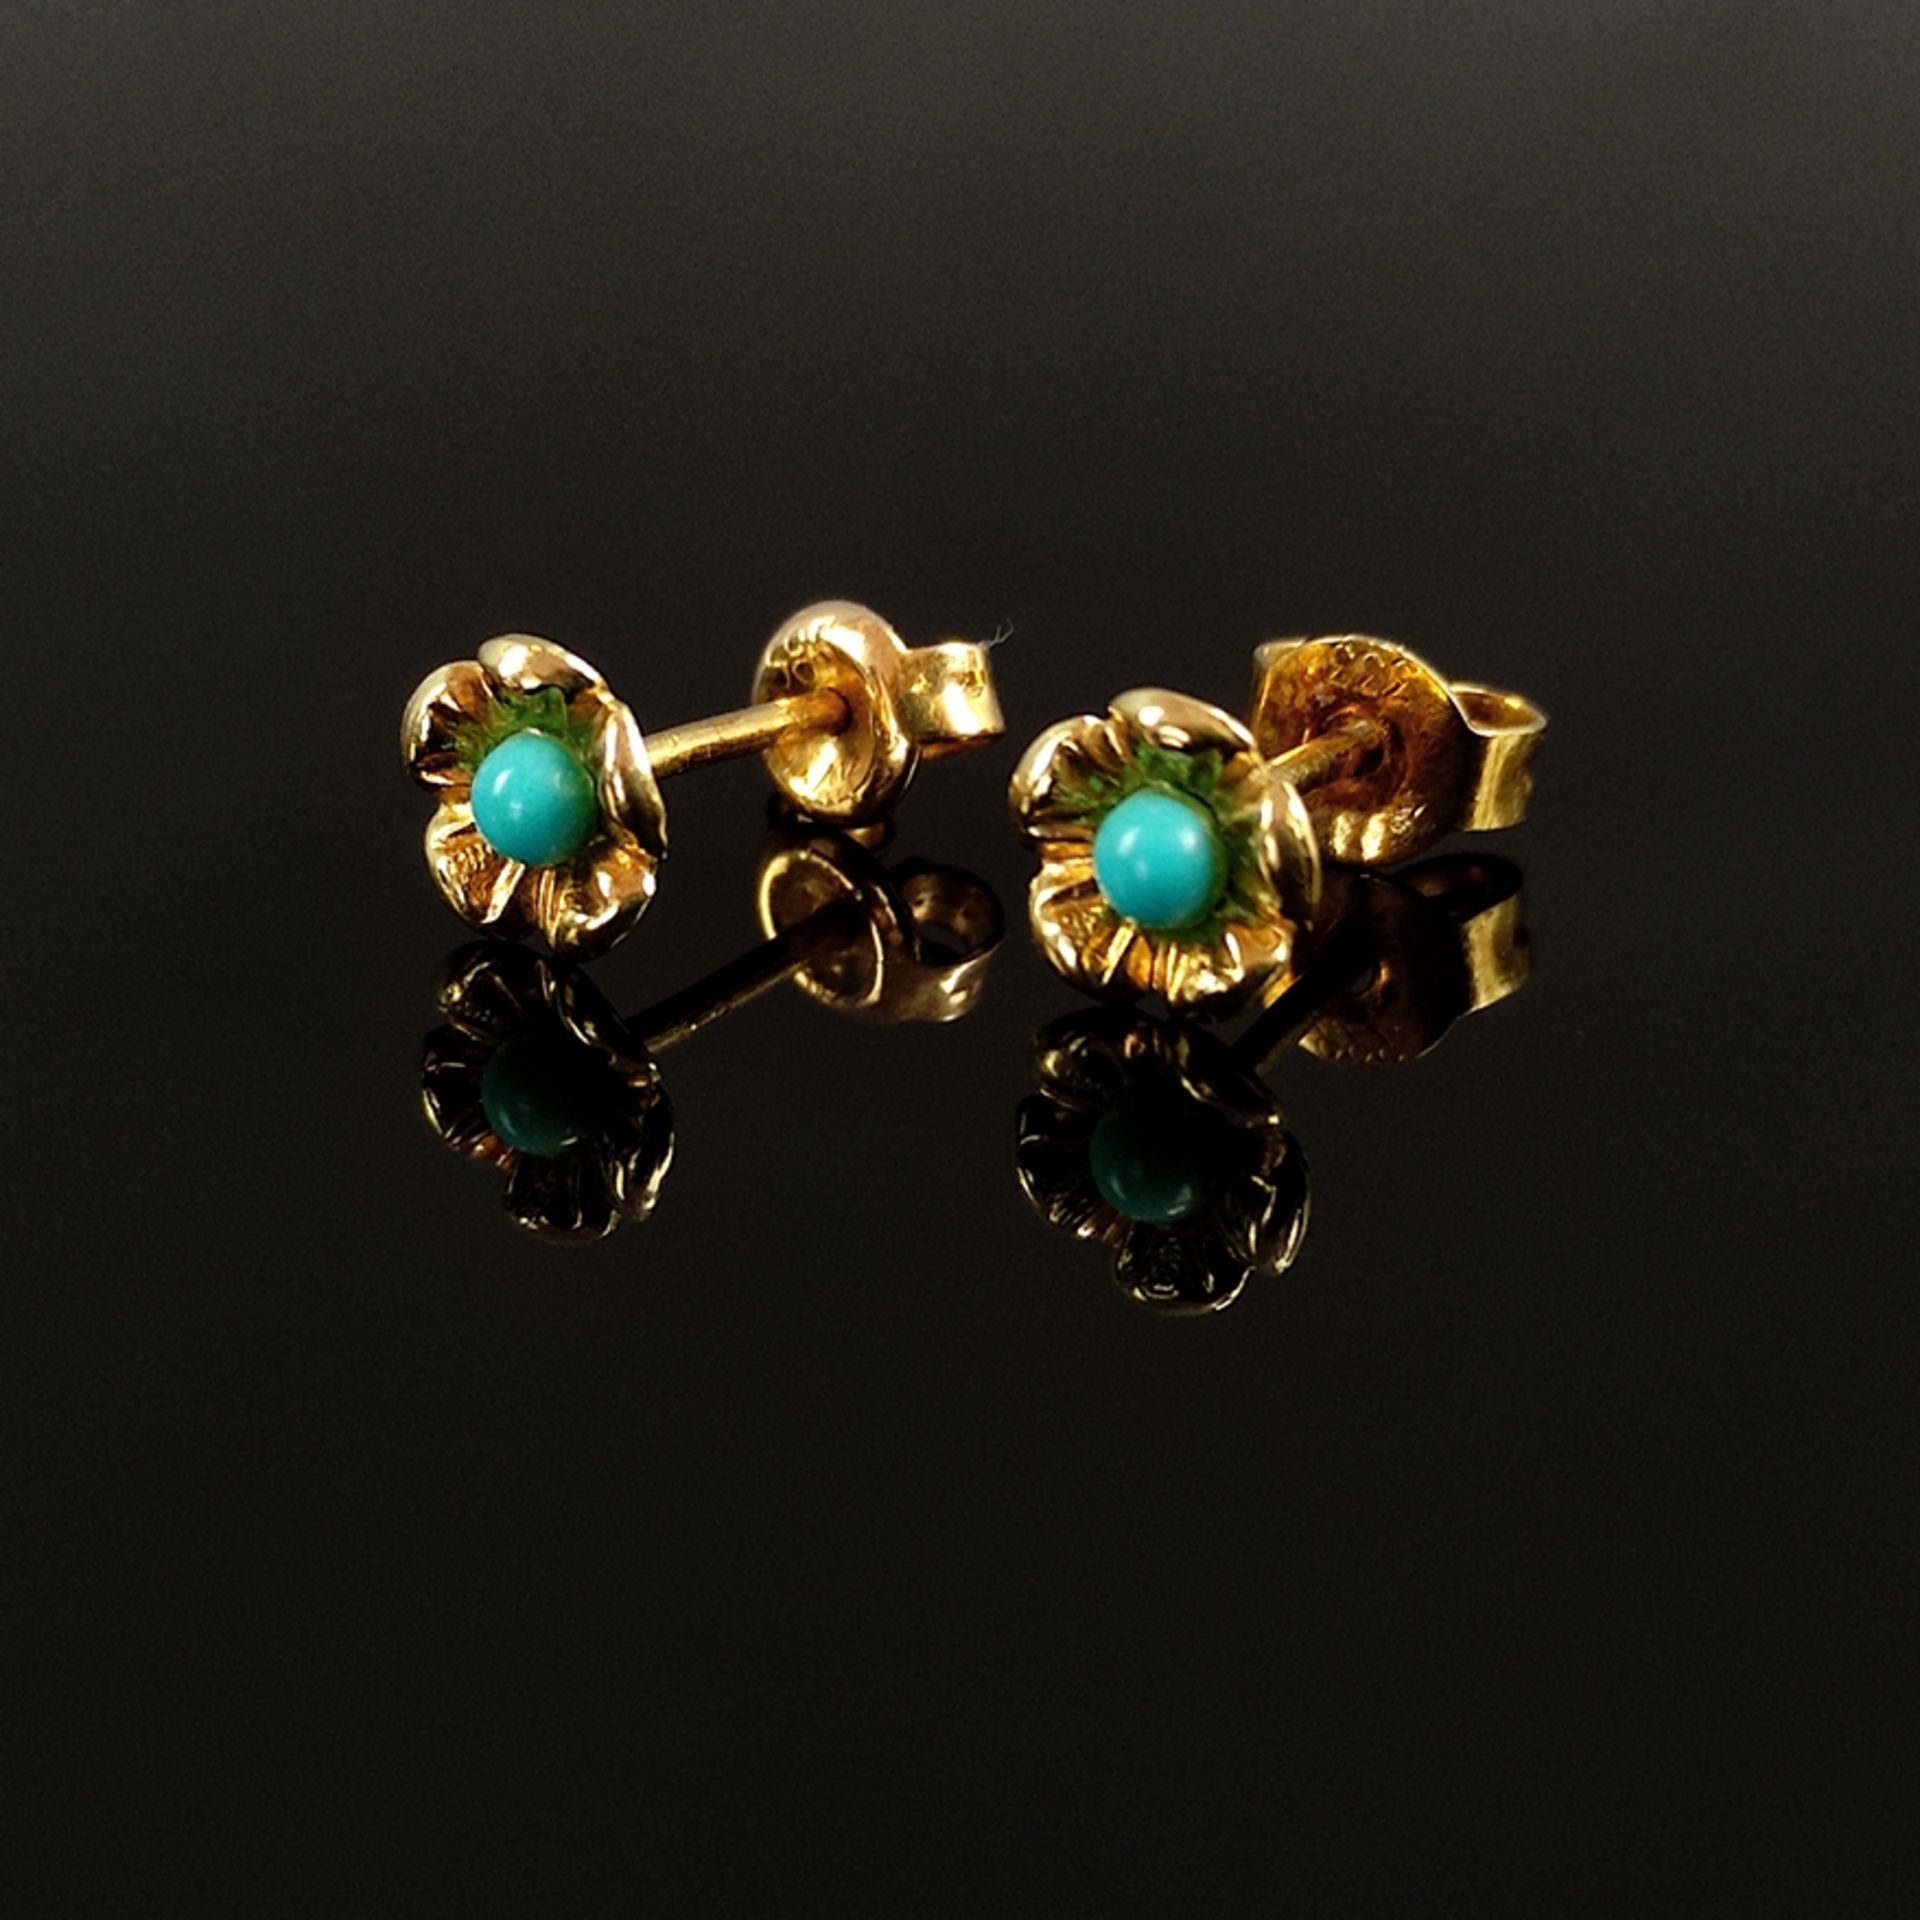 Pair of ear studs with turquoises, 585/14K yellow gold, 0,44g, one ear nut 333/8K yellow gold, flow